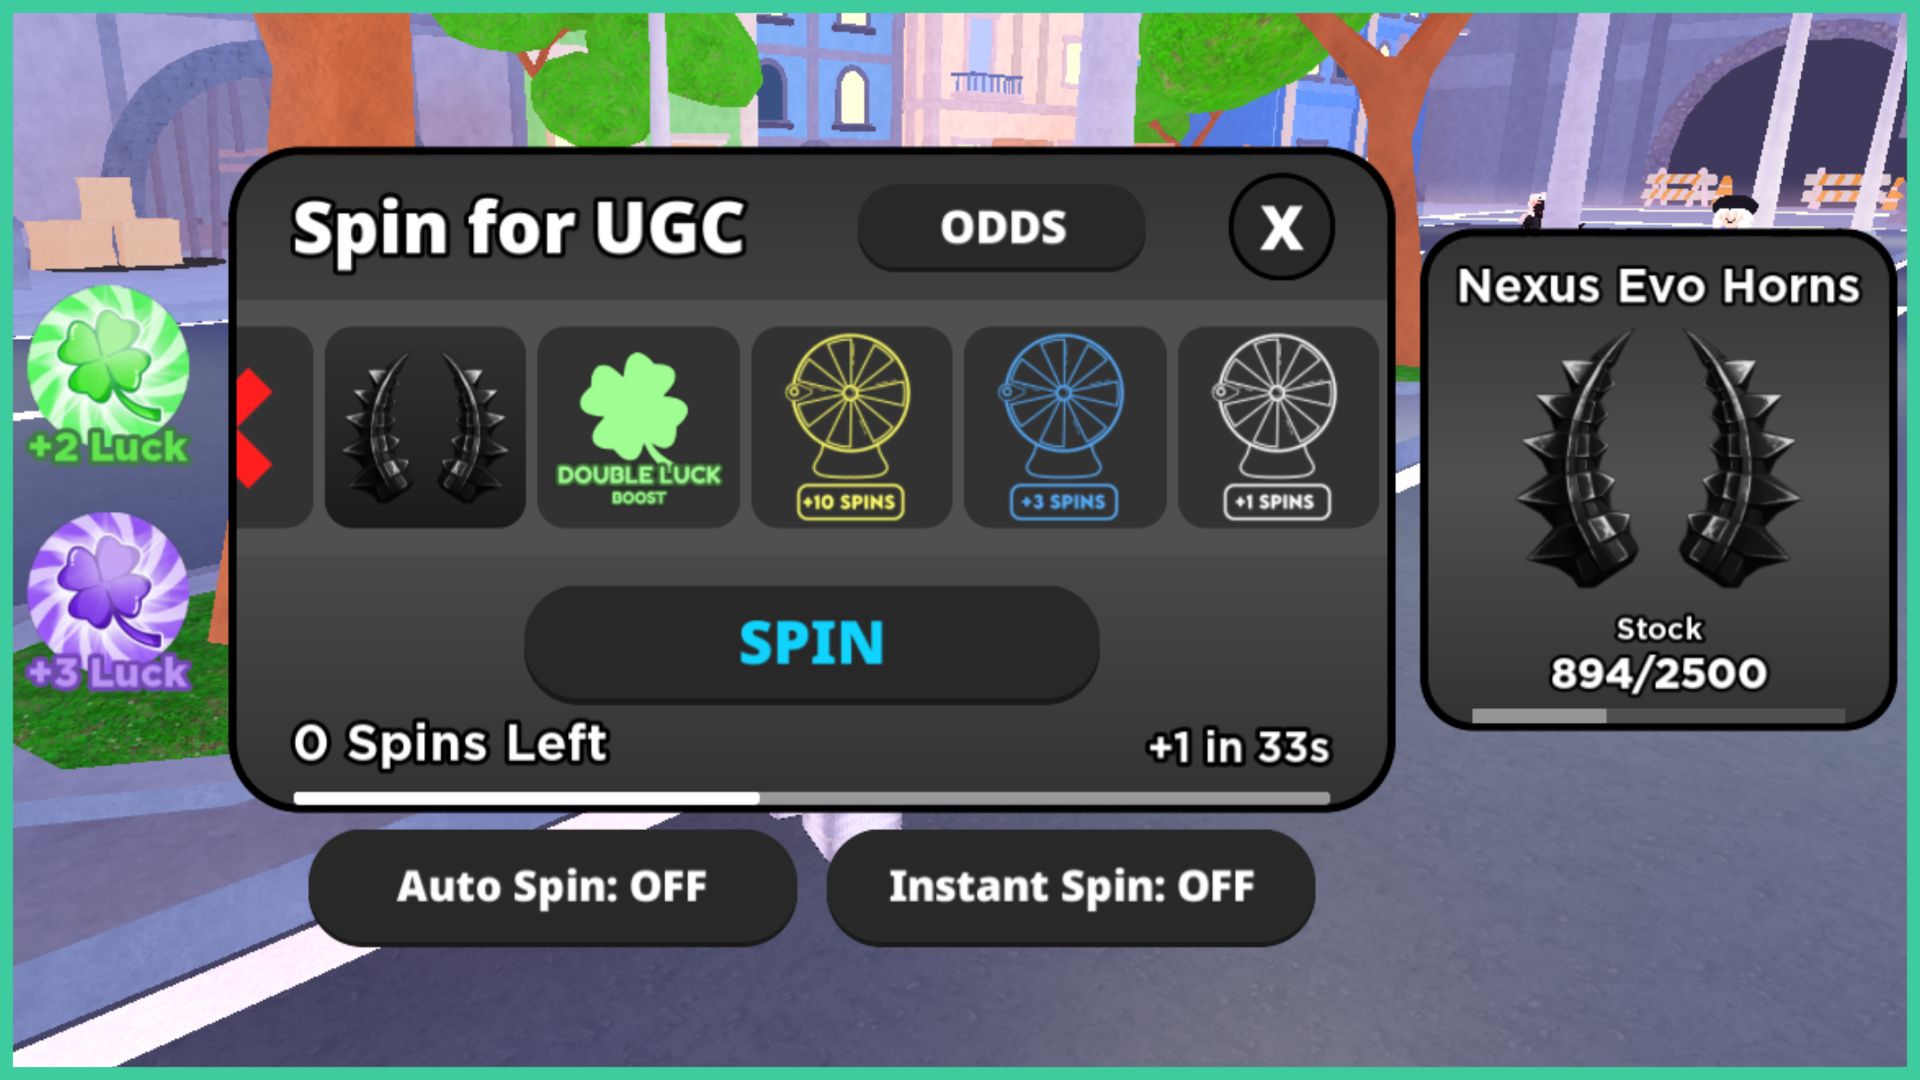 Spin 4 Free UGC Codes – Free Spins and Luck Boosts